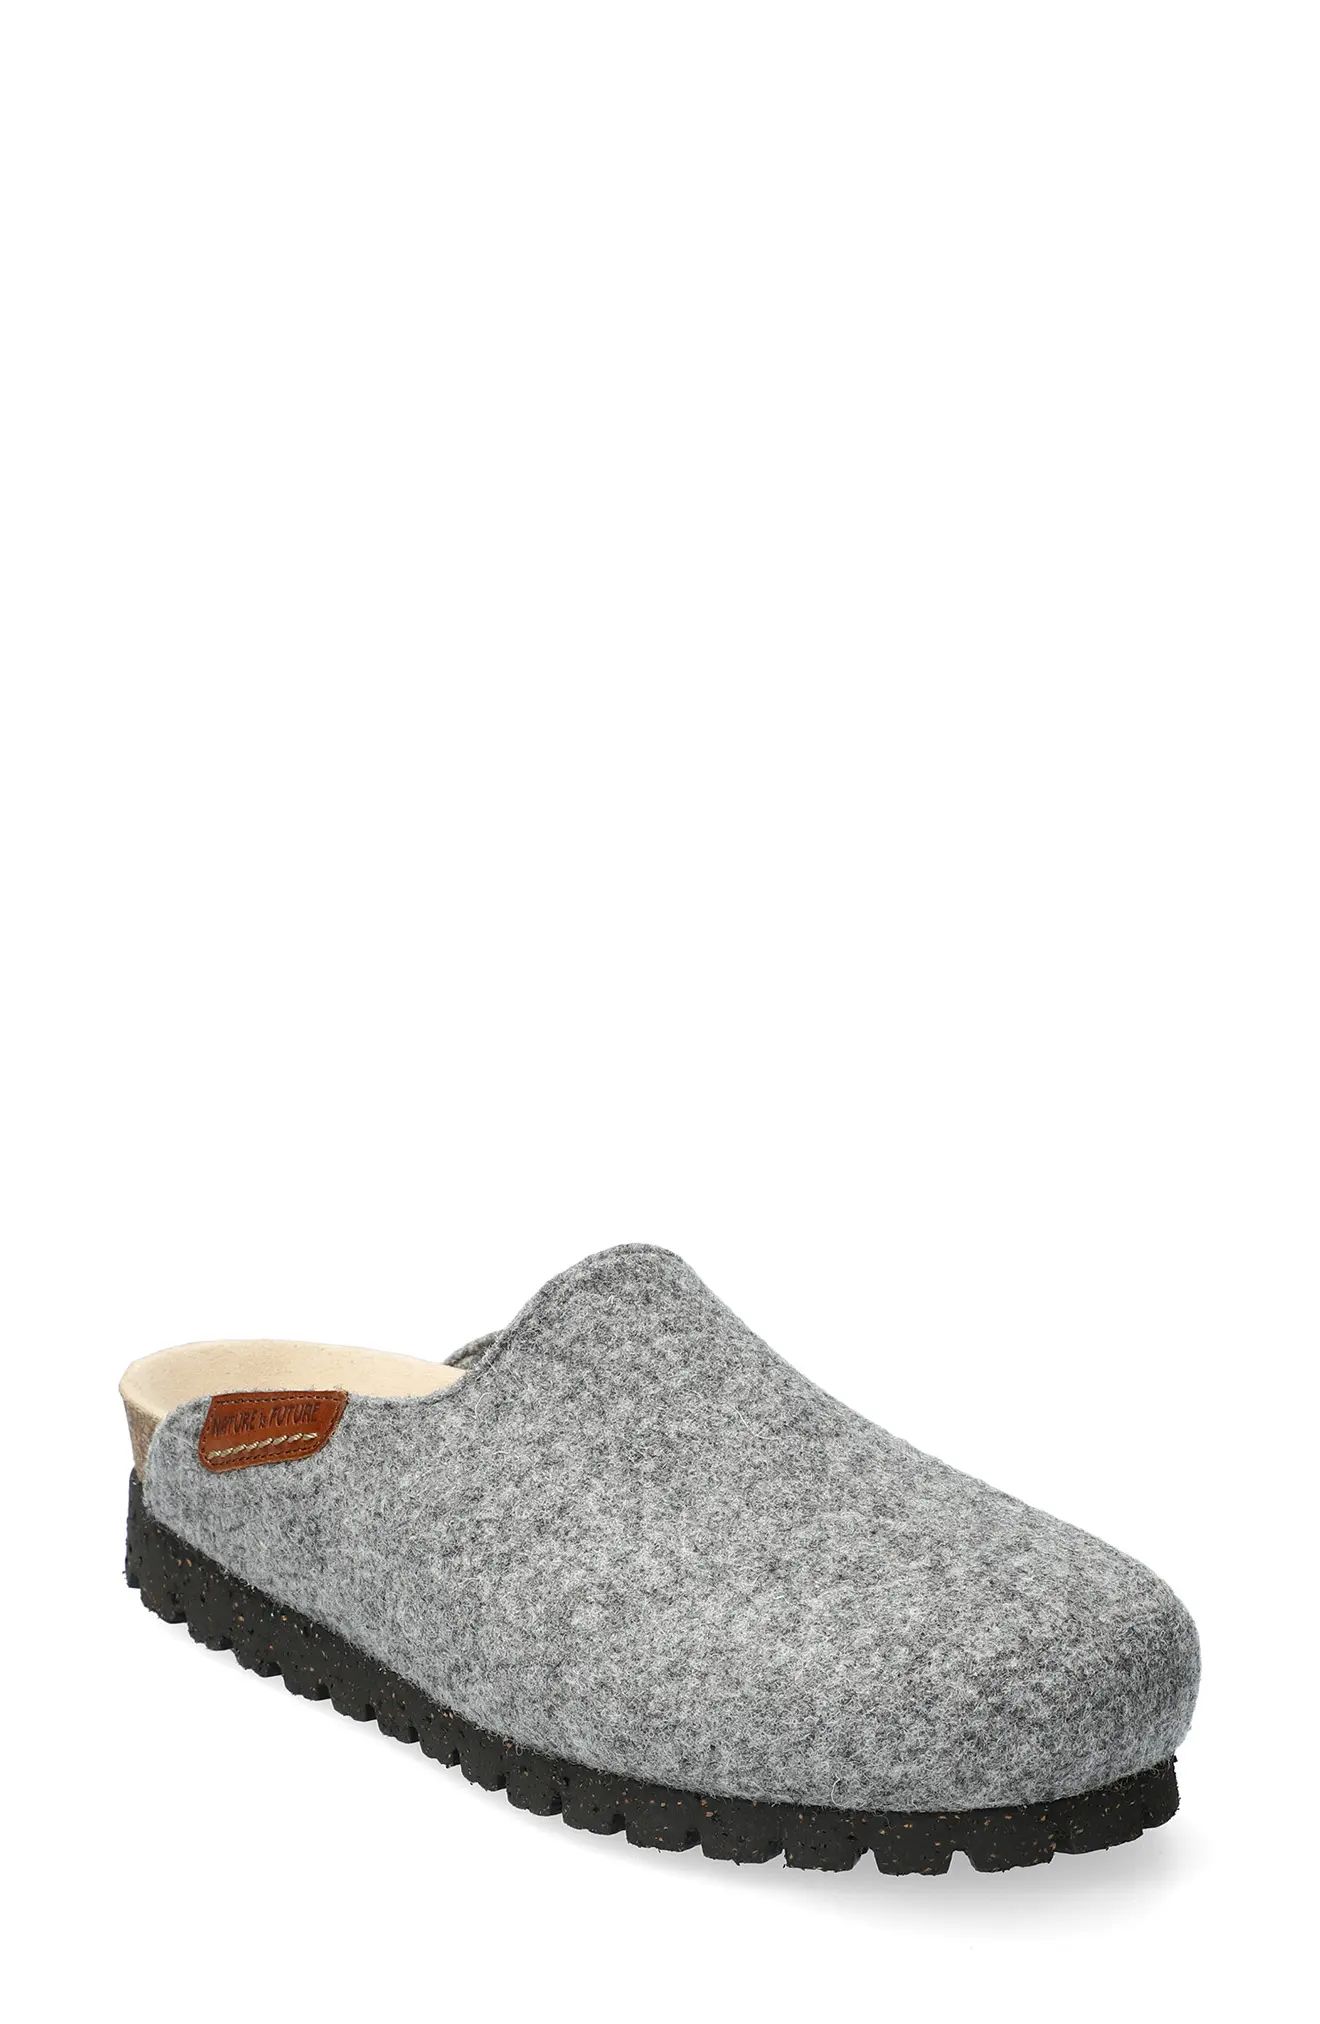 Mephisto Thea Boiled Wool Clog in Grey Sweety at Nordstrom, Size 8 | Nordstrom